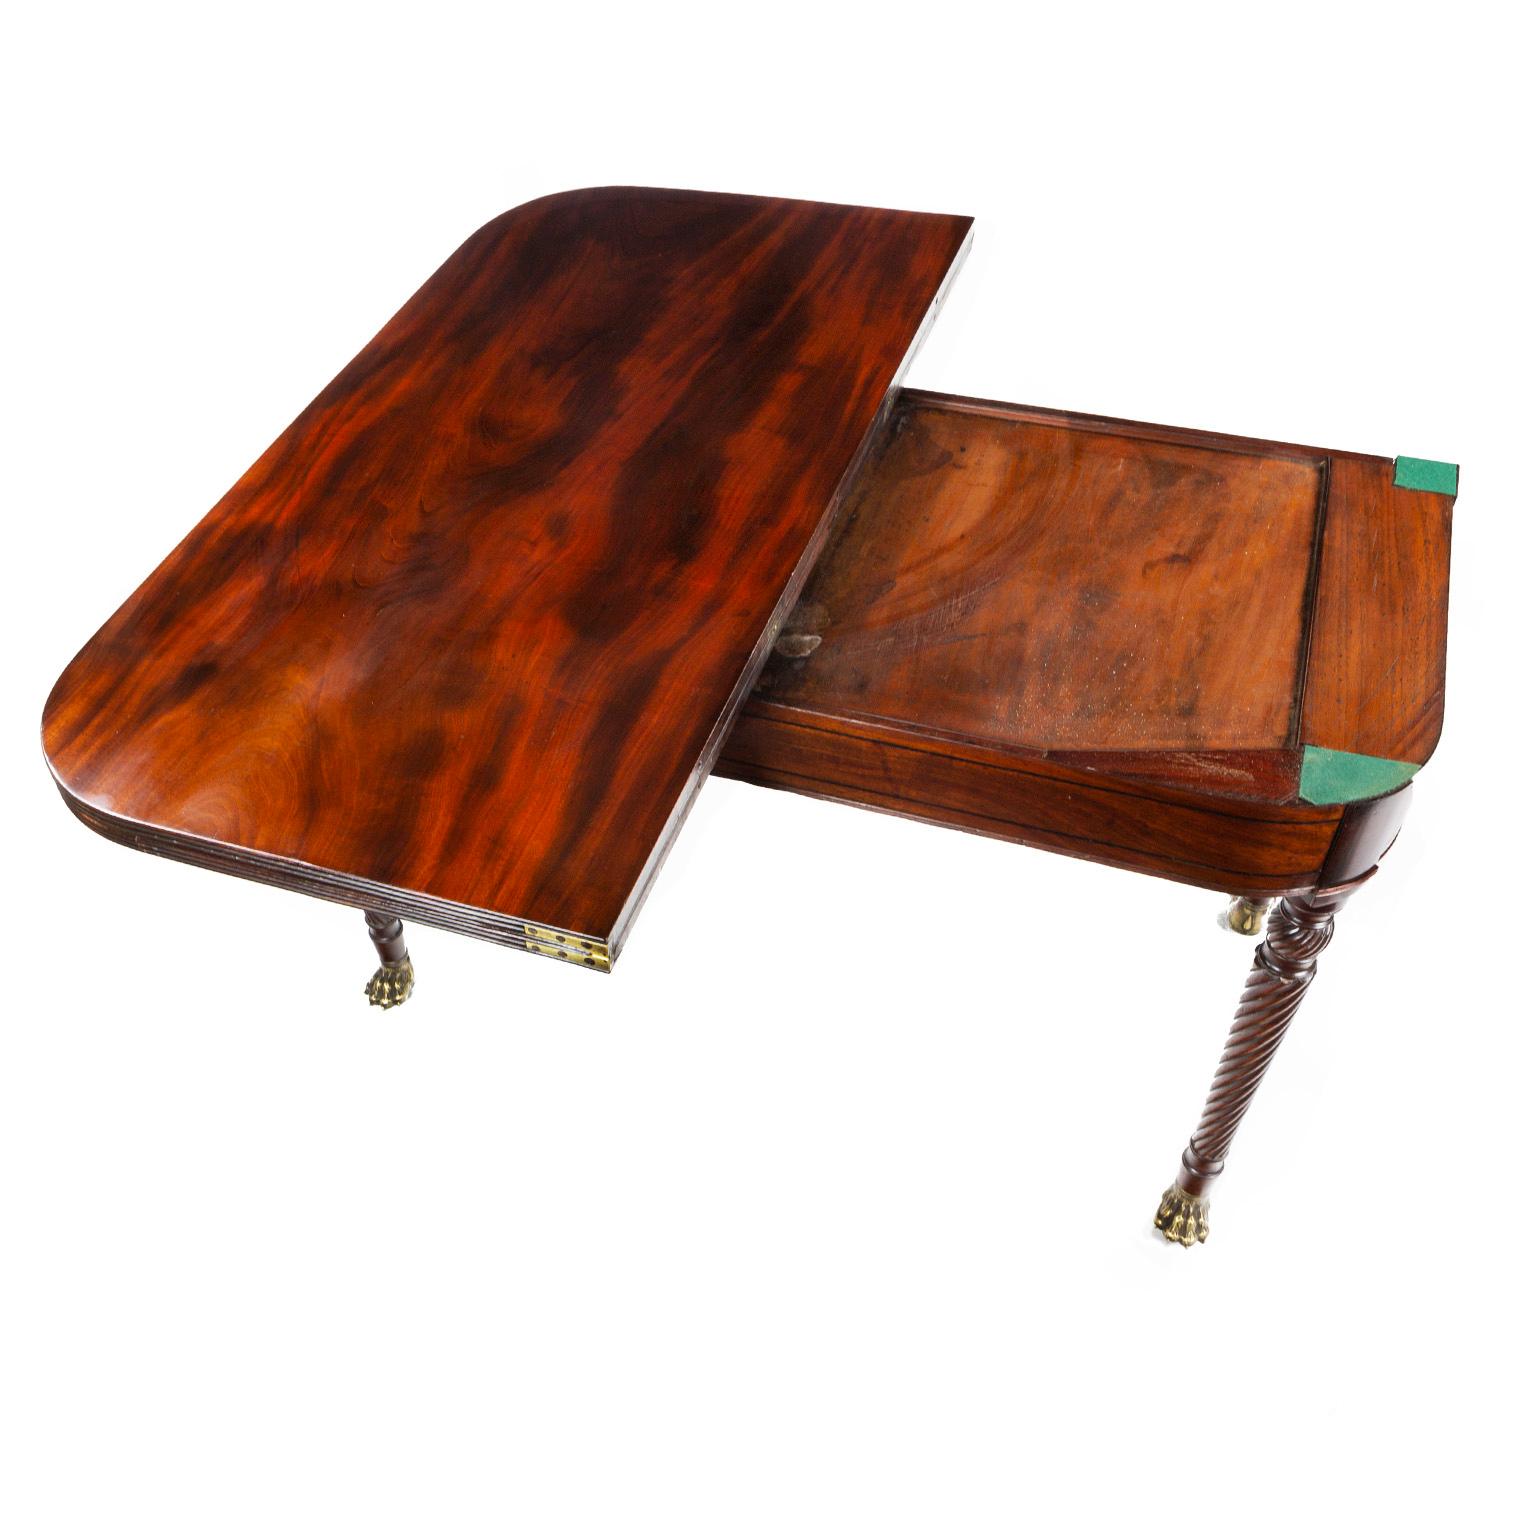 A Georgian, finest mahogany, fold over dining table with spiral turned legs two draws, brass hairy paw feet incorporating brass castors, attributed to Robert Strahan

Founded in 1776 as a cabinet maker, Robert Strahan & Co. grew to become one of